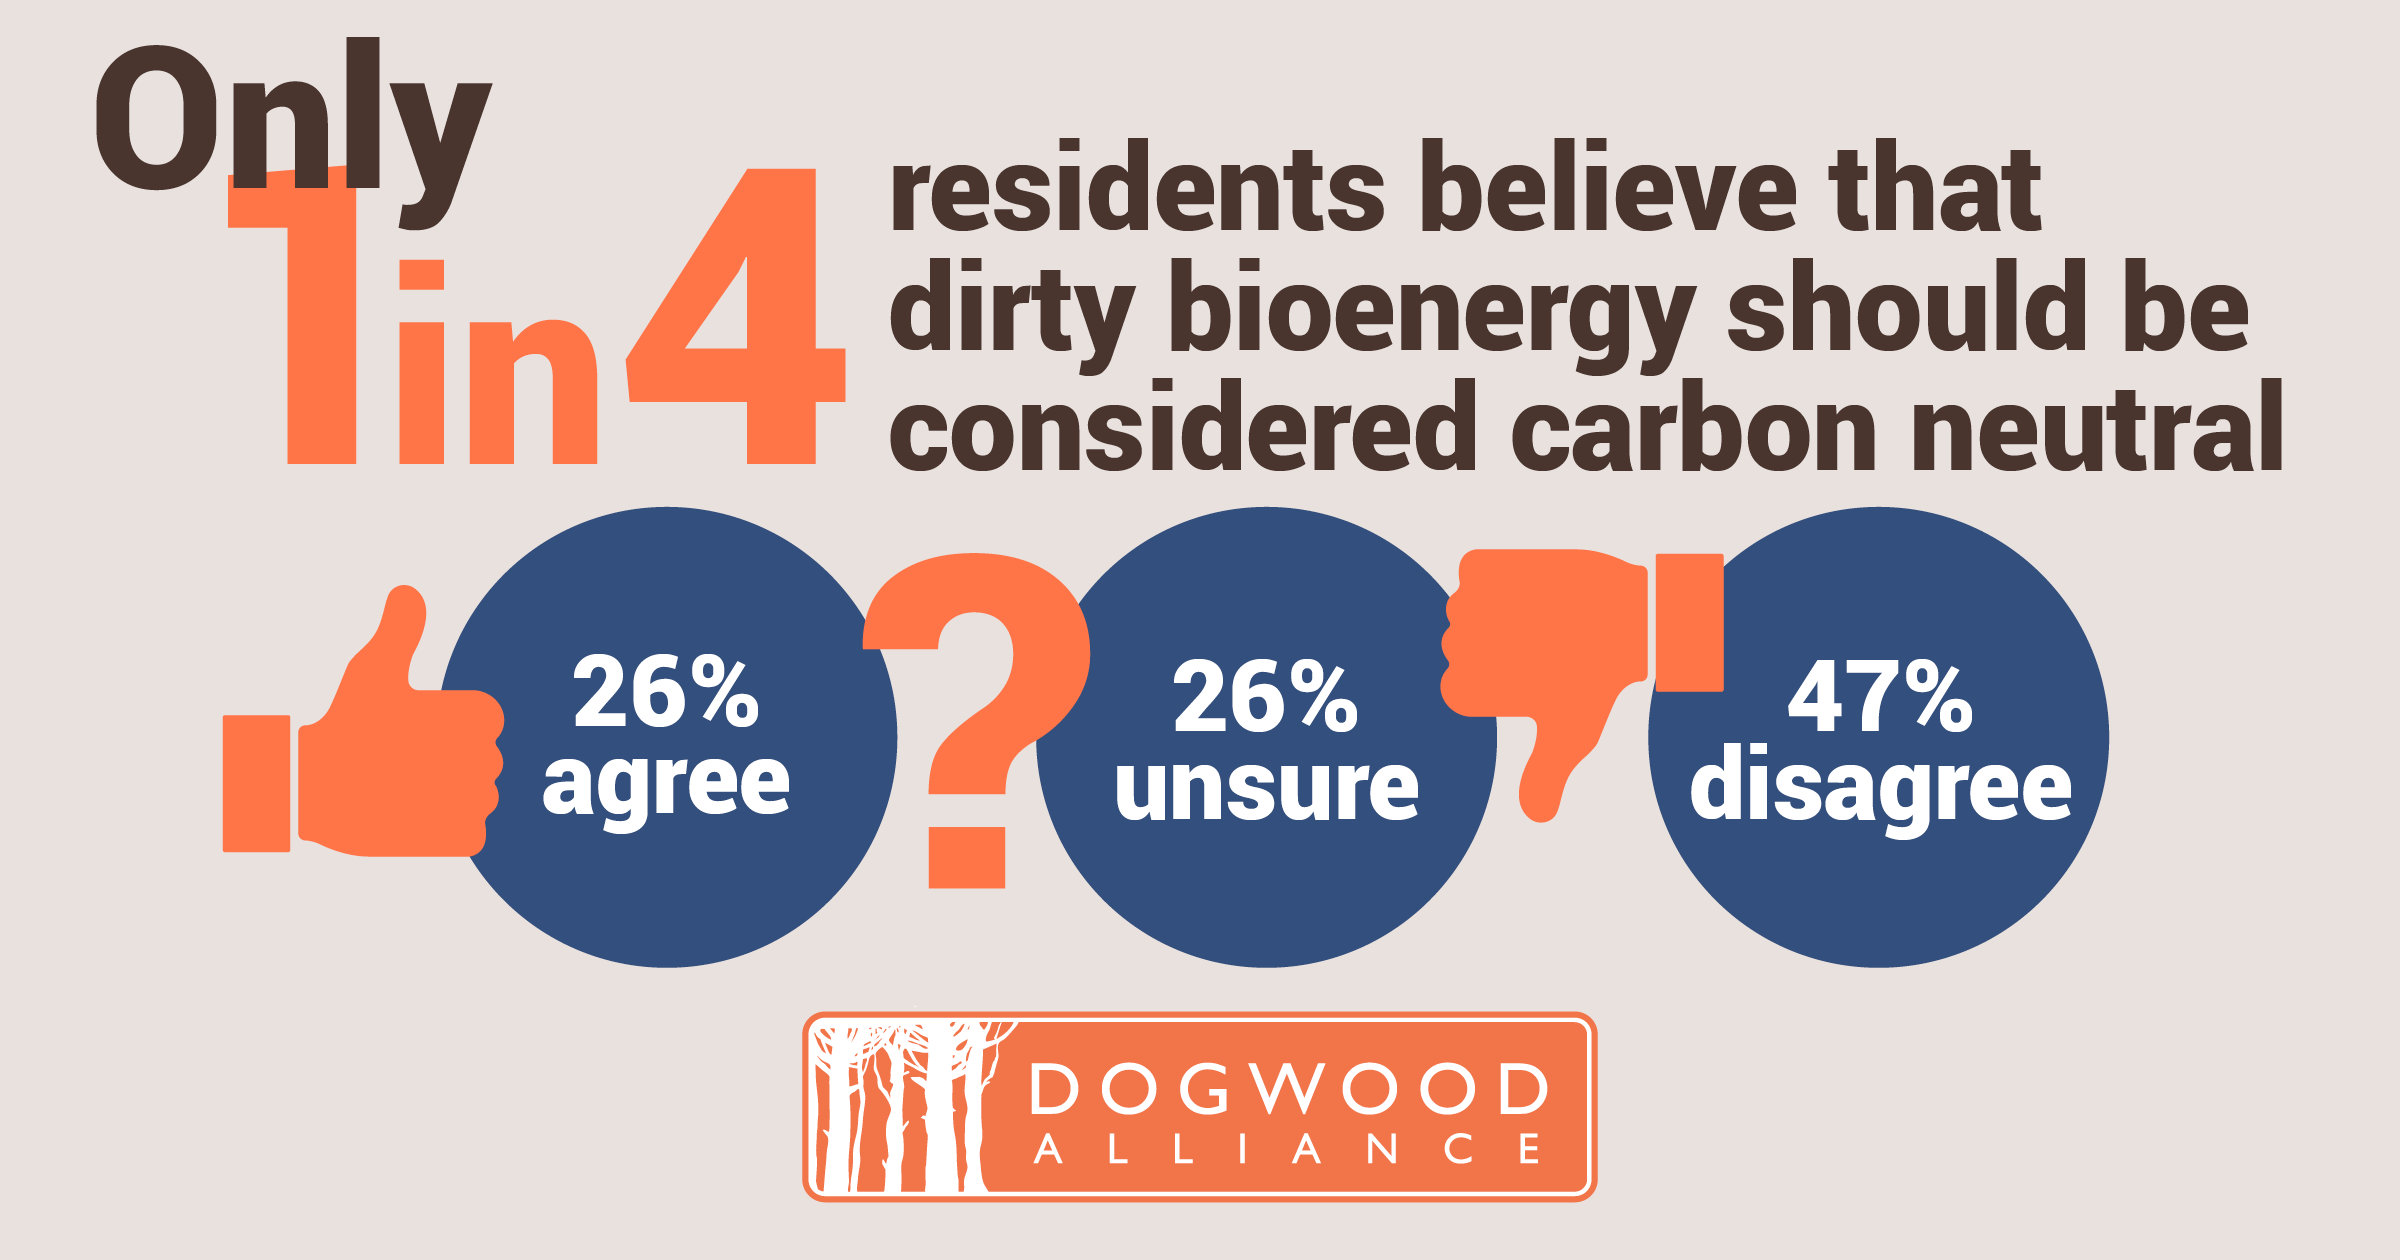 Just one in four residents believe that dirty bioenergy should be considered carbon neutral